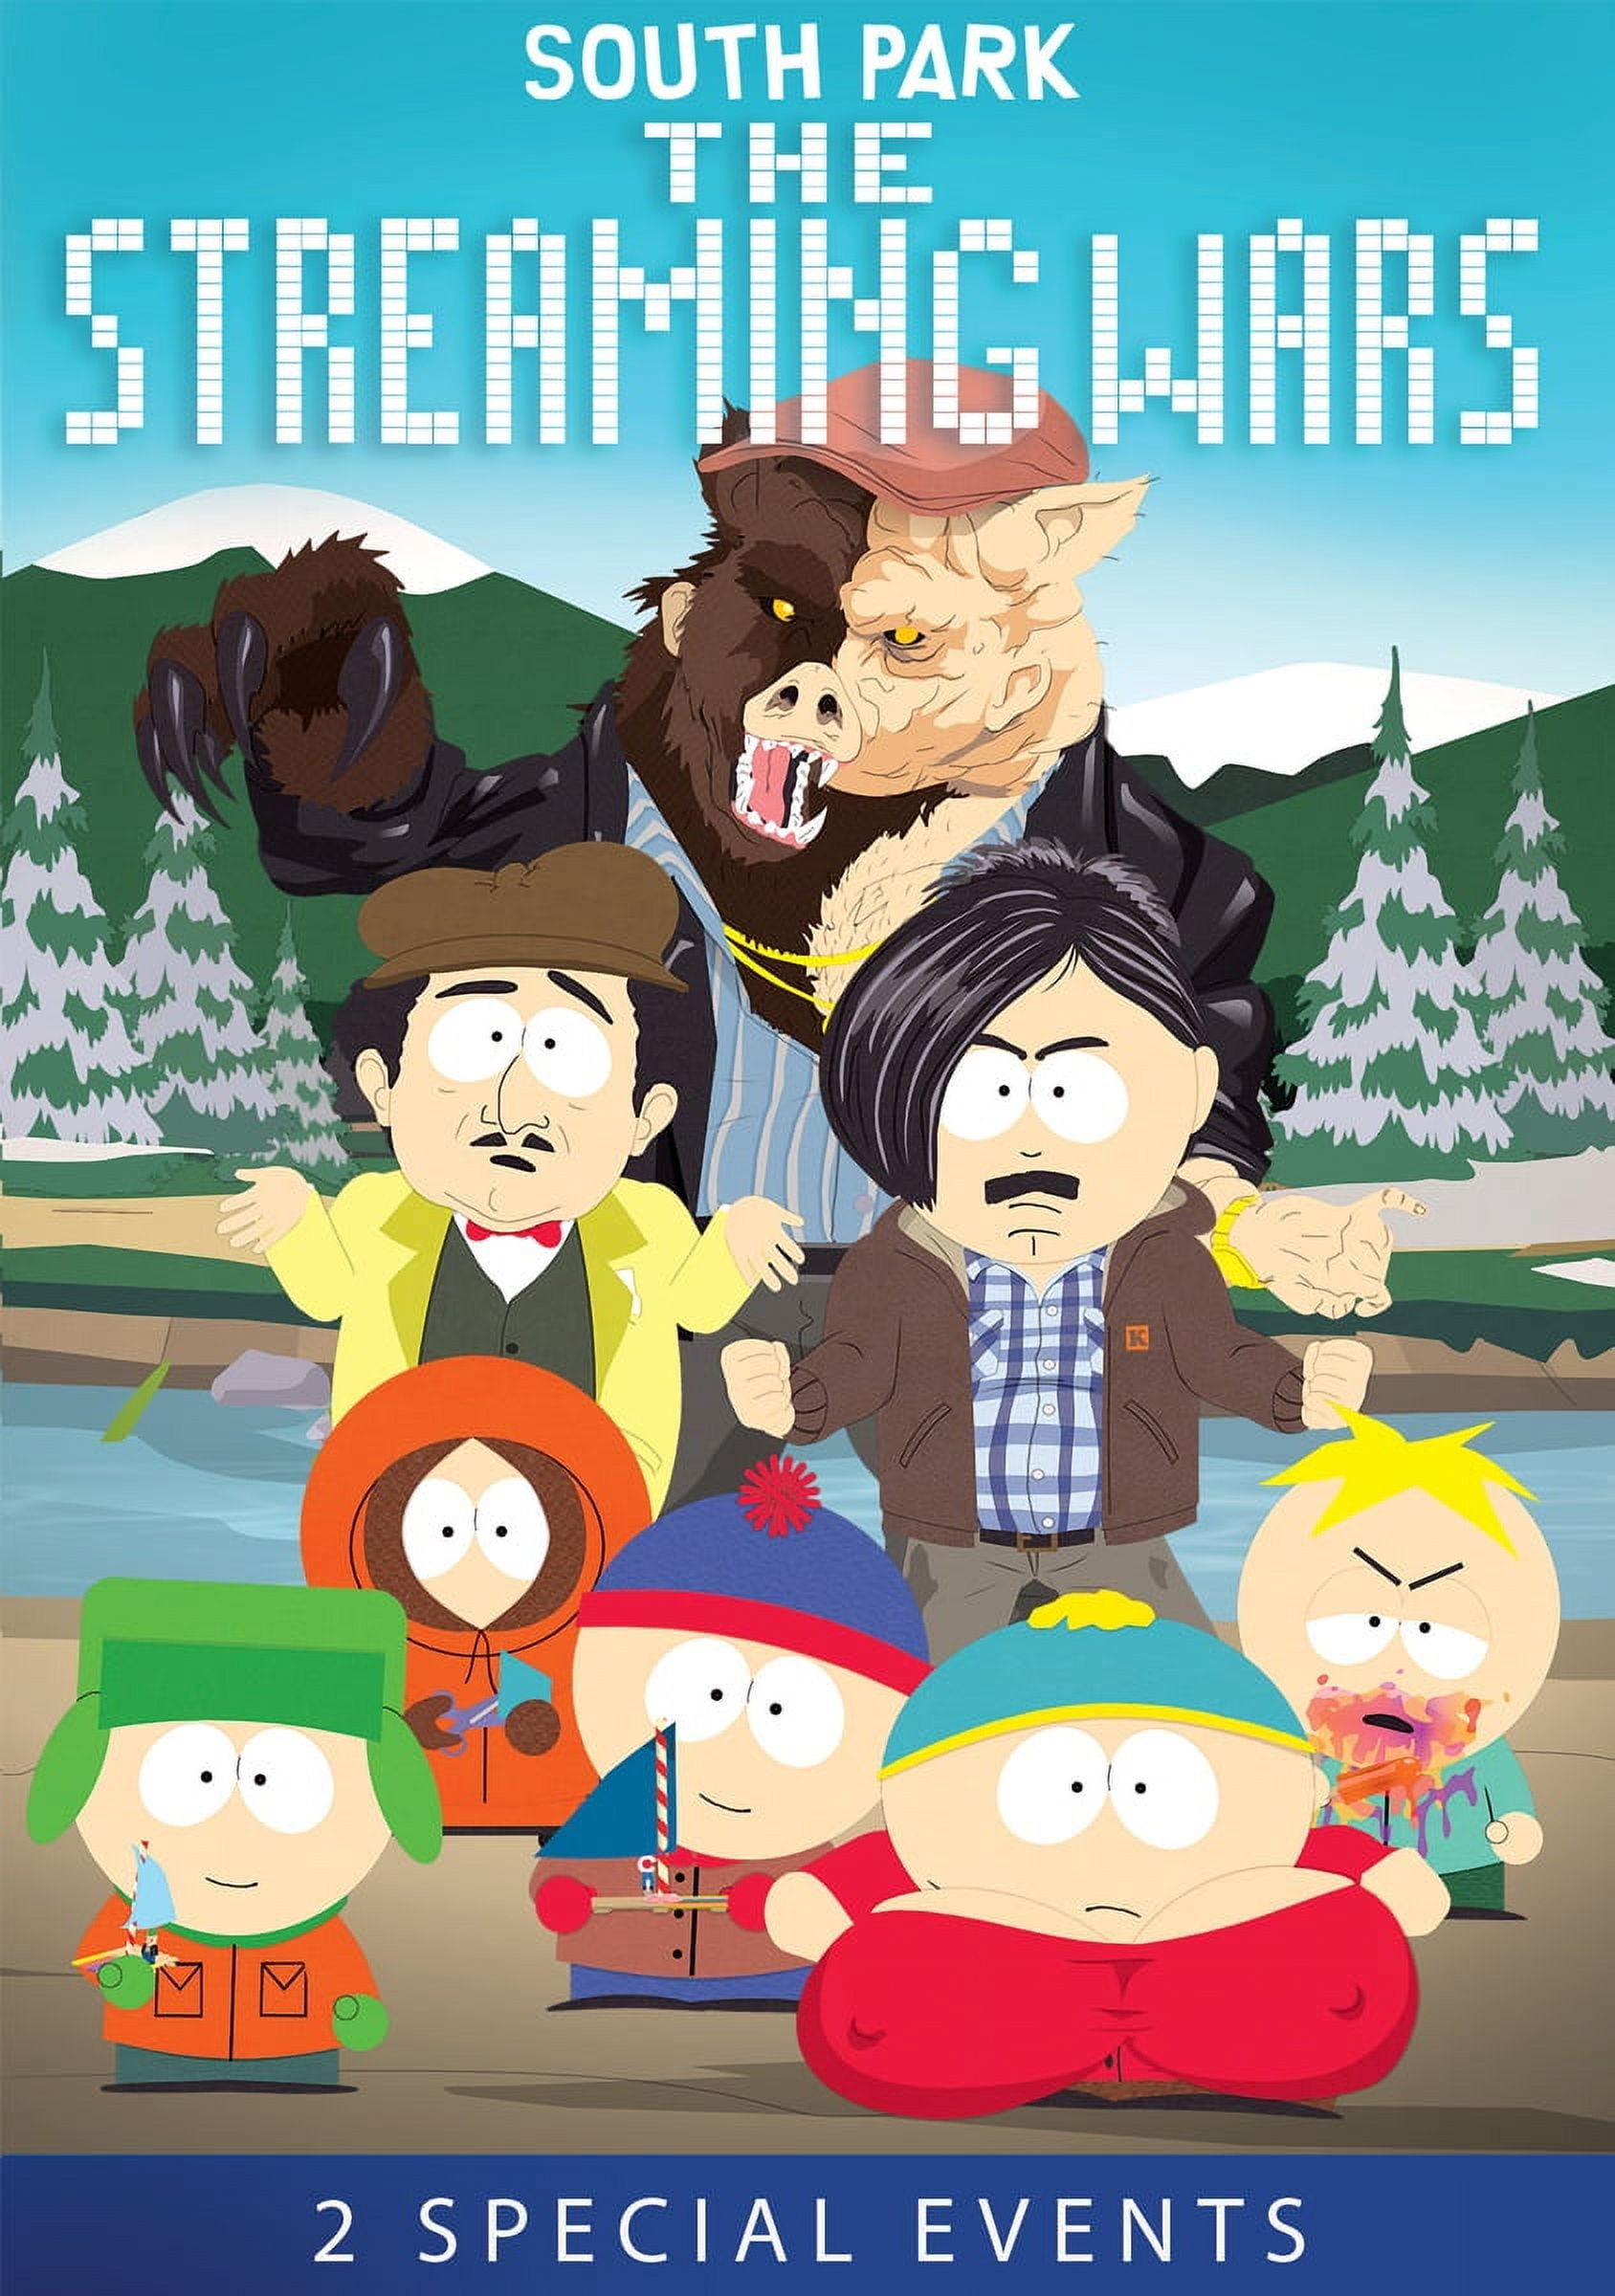 NickALive!: How to Stream 'South Park The Streaming Wars' for FREE